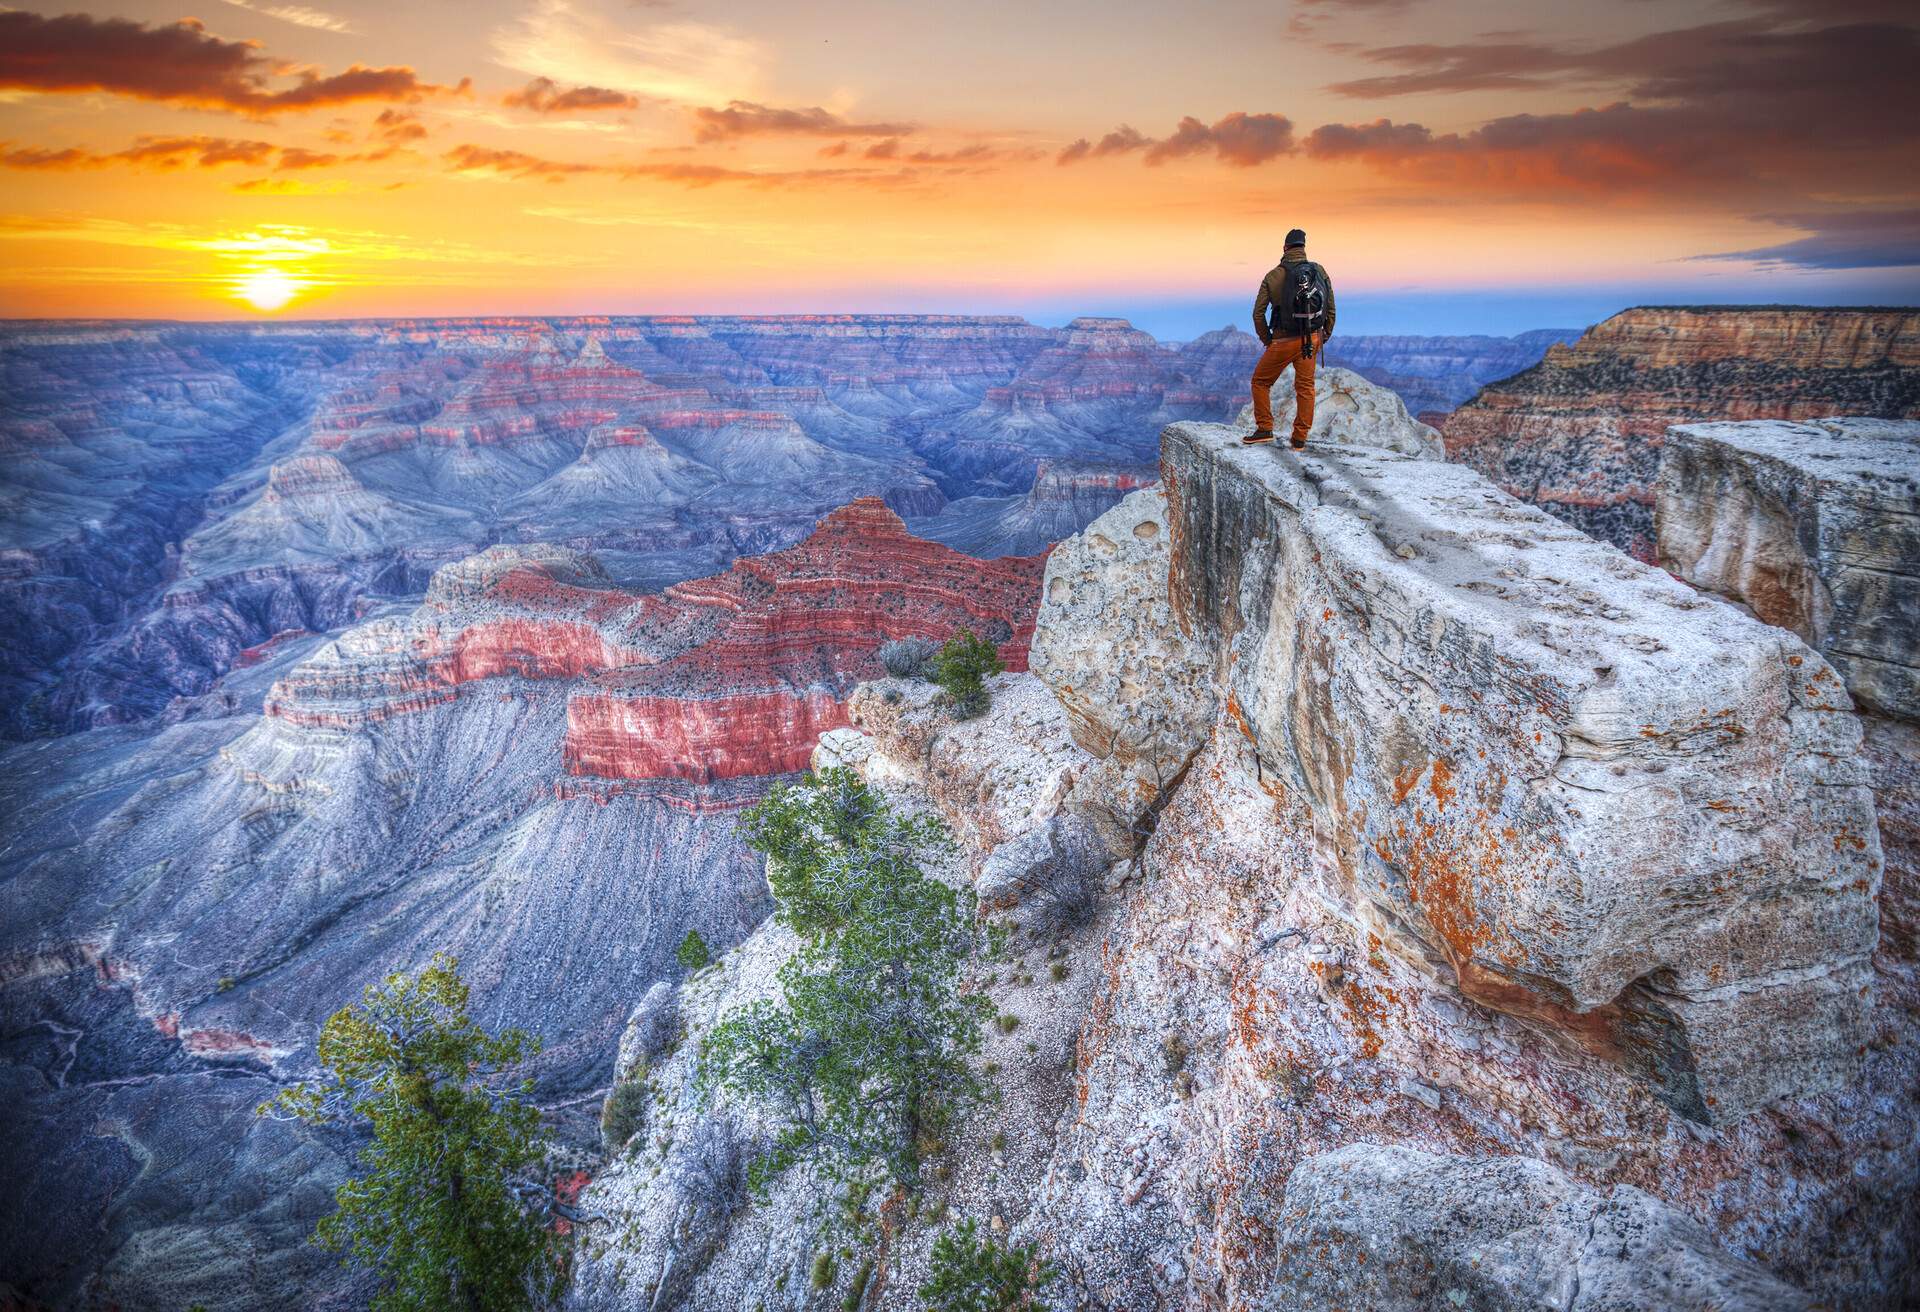 A man stands on top of a rocky mountain overlooking the Grand Canyon landscape, Arizone, USA.